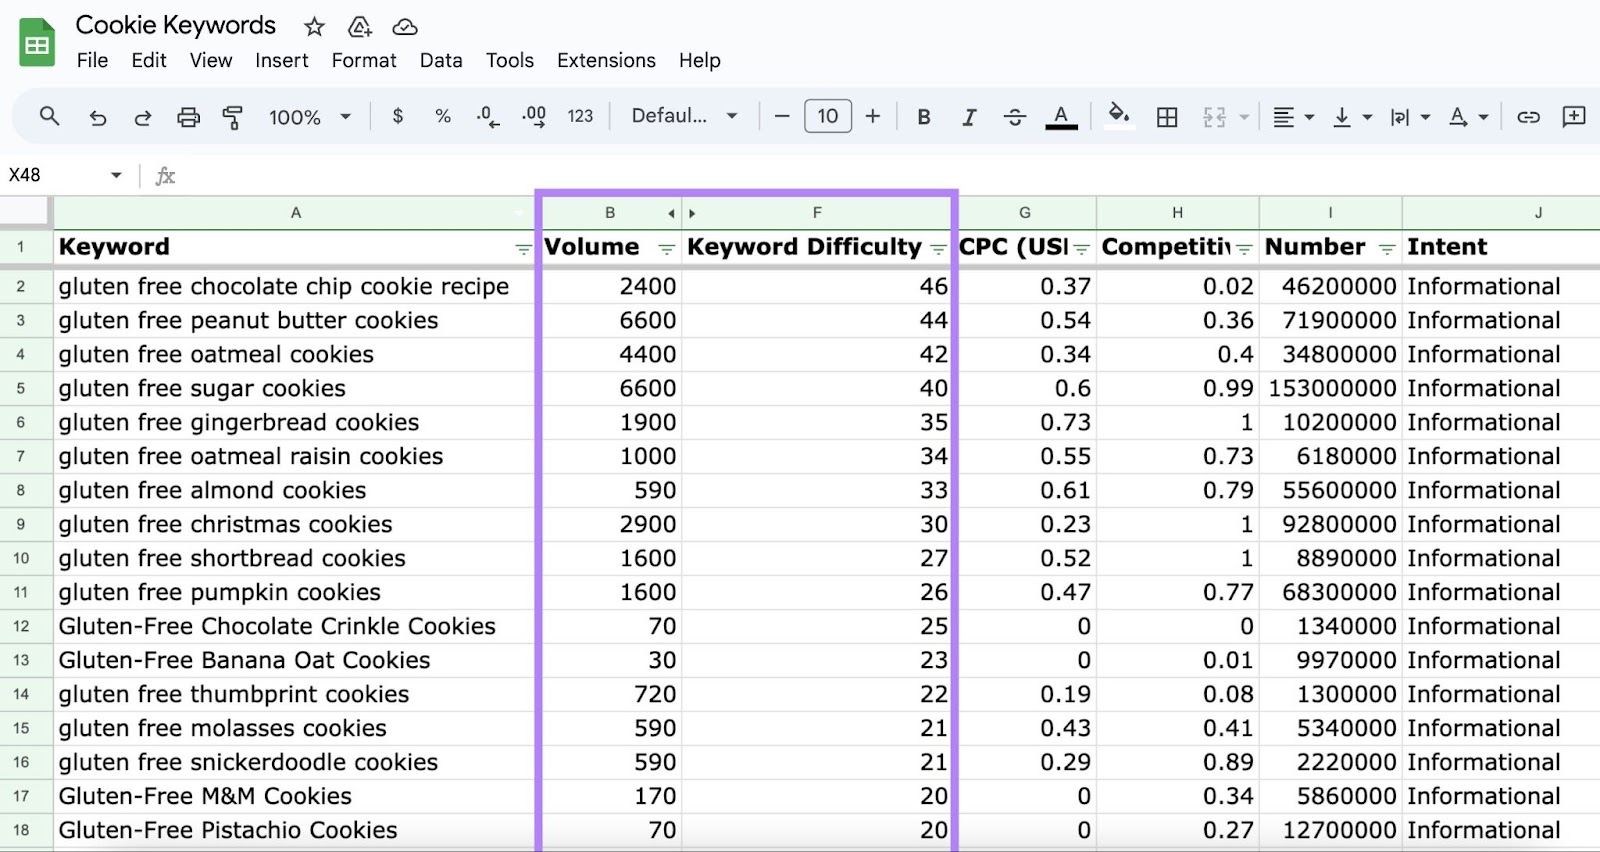 "Volume," and "Keyword Difficulty" columns highlighted in the exported keywords spreadsheet